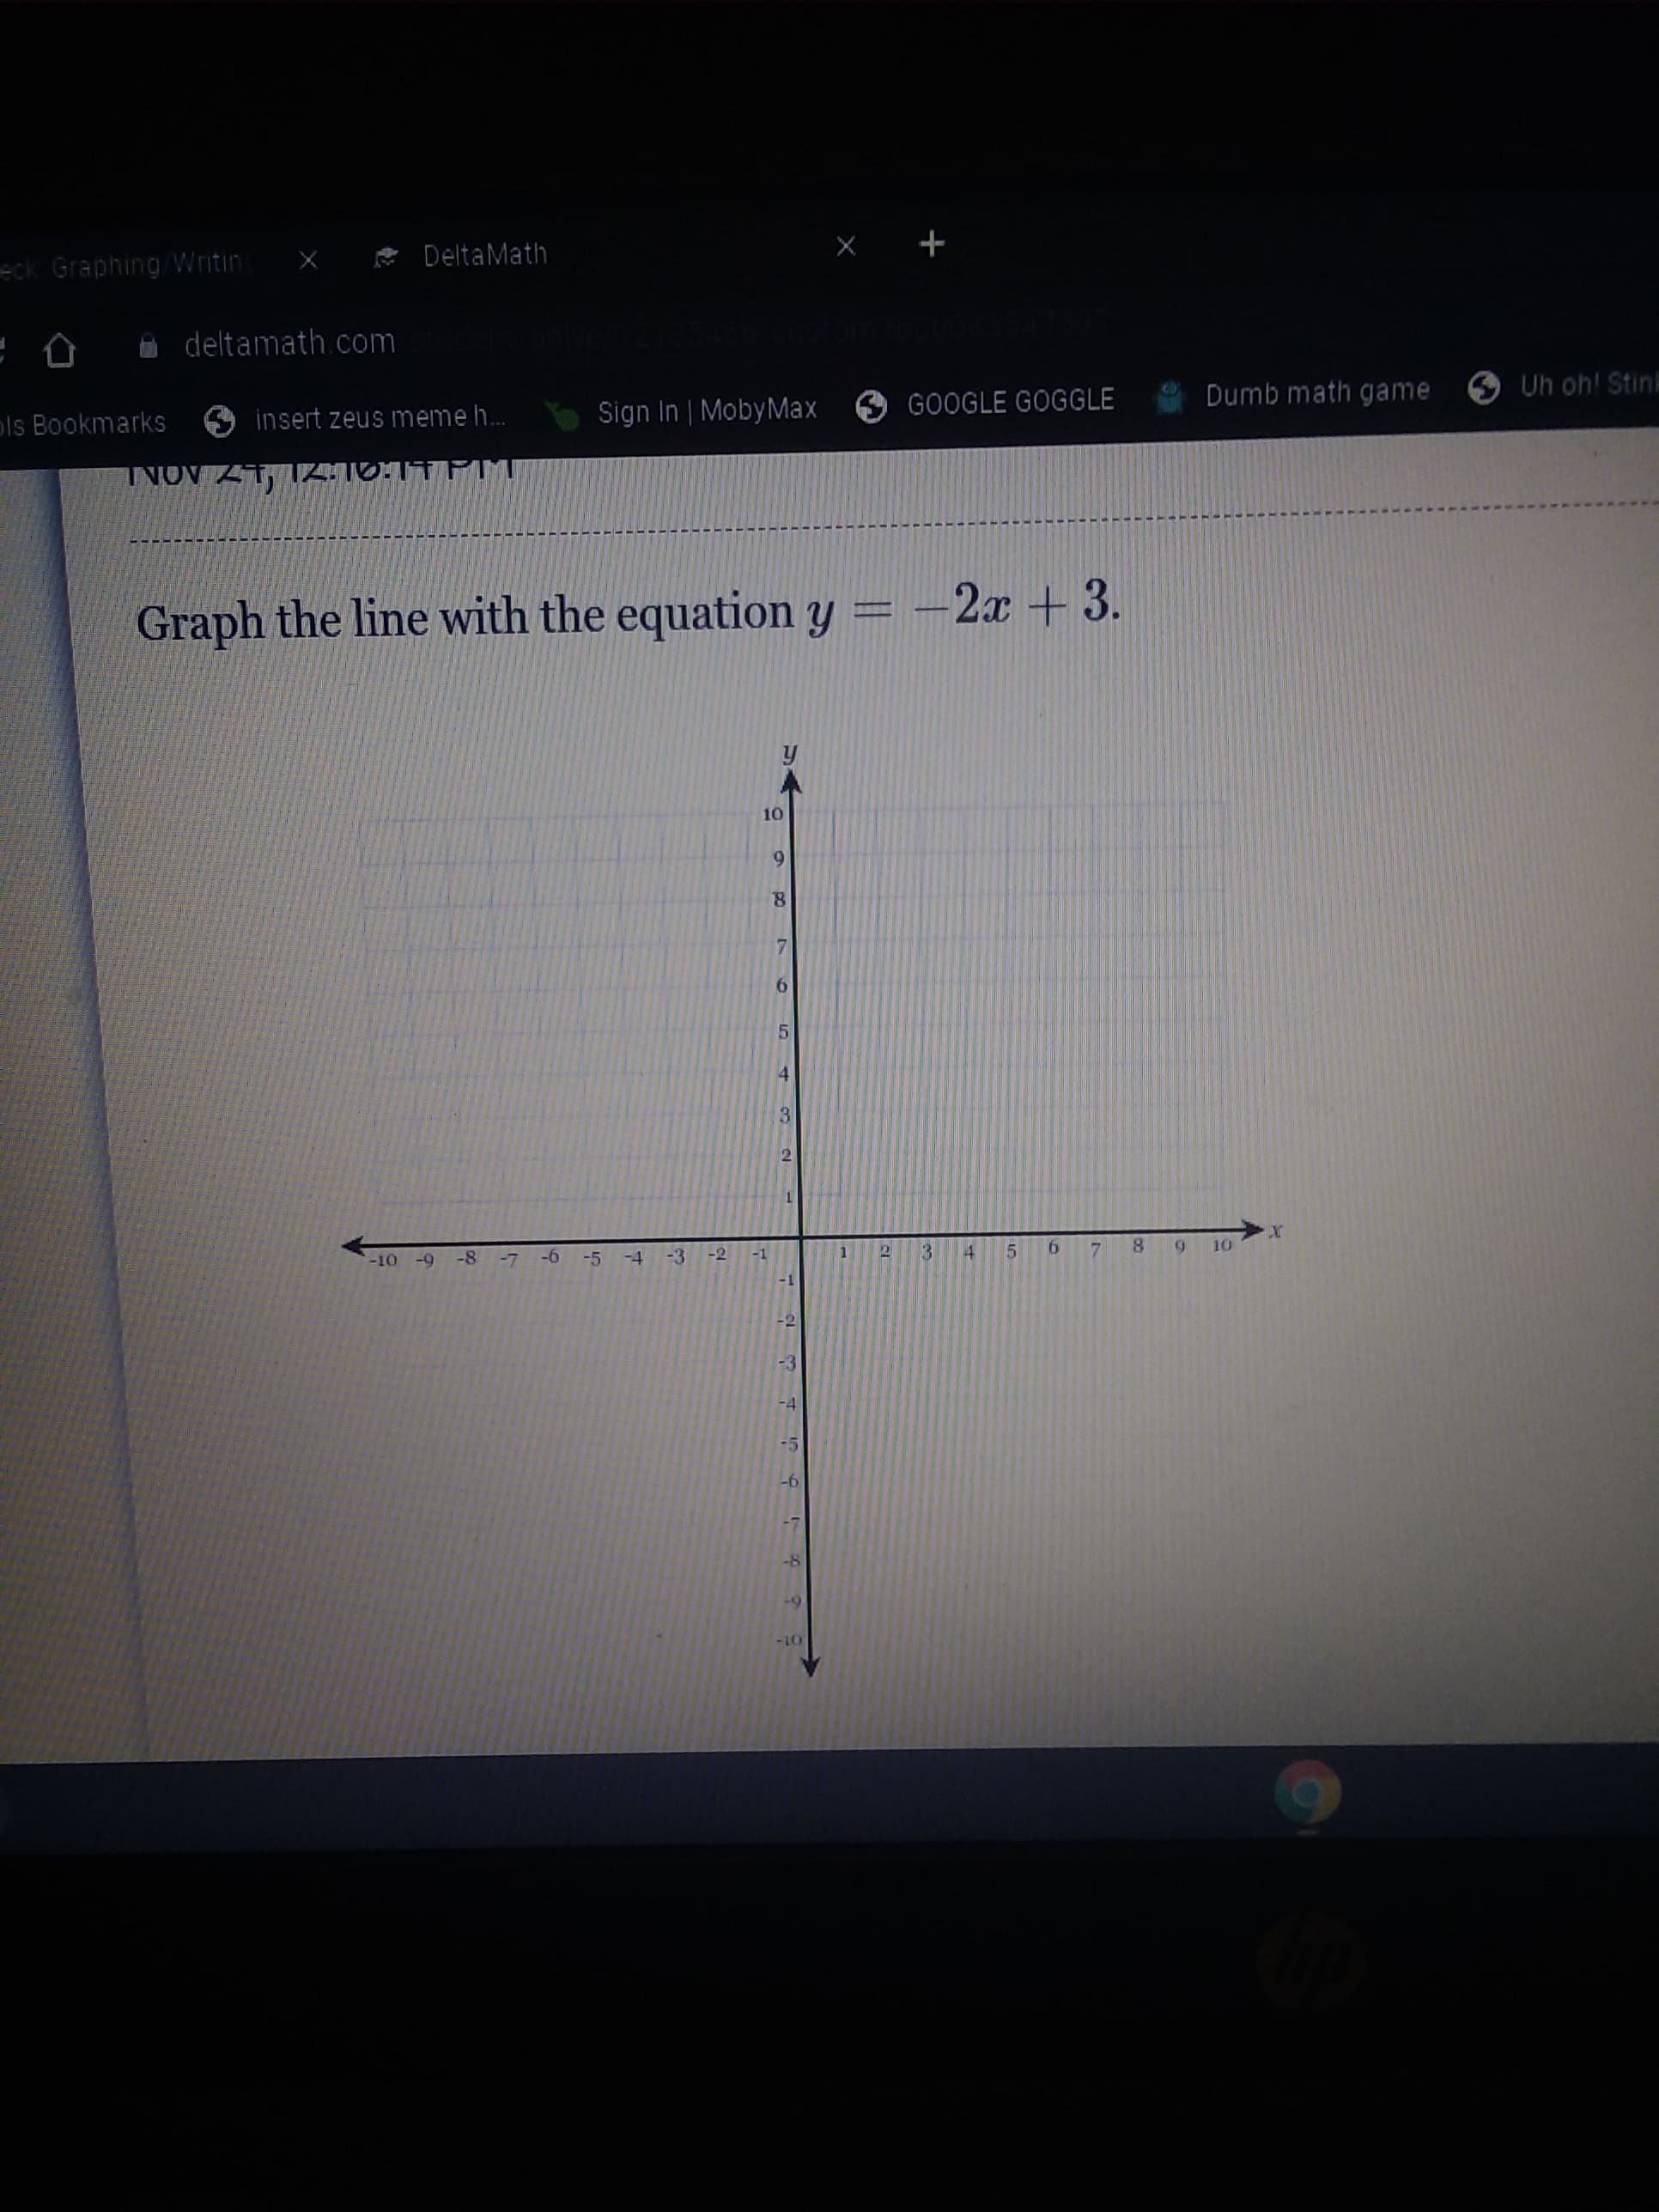 Graph the line with the equation y = -2x + 3.
